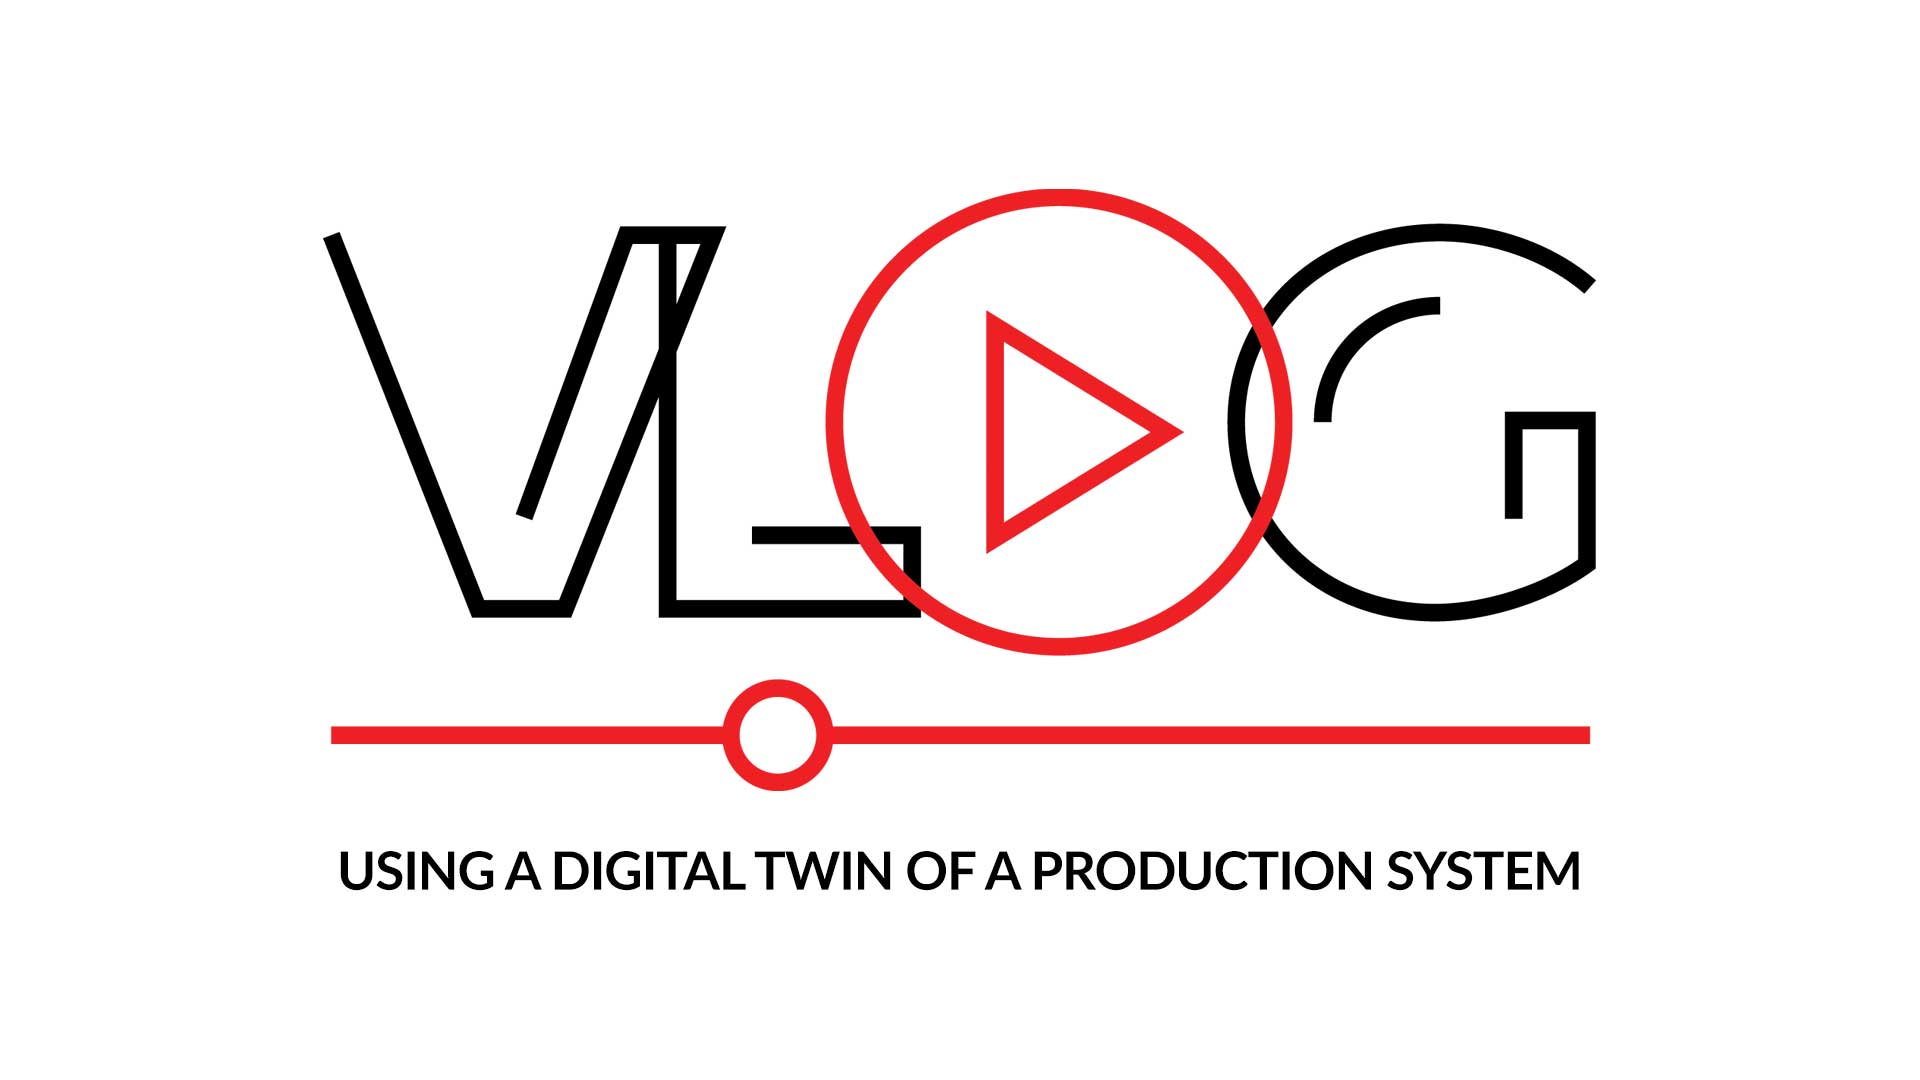 What is a Digital Twin of a Production System and Why Would You Want to Use it?